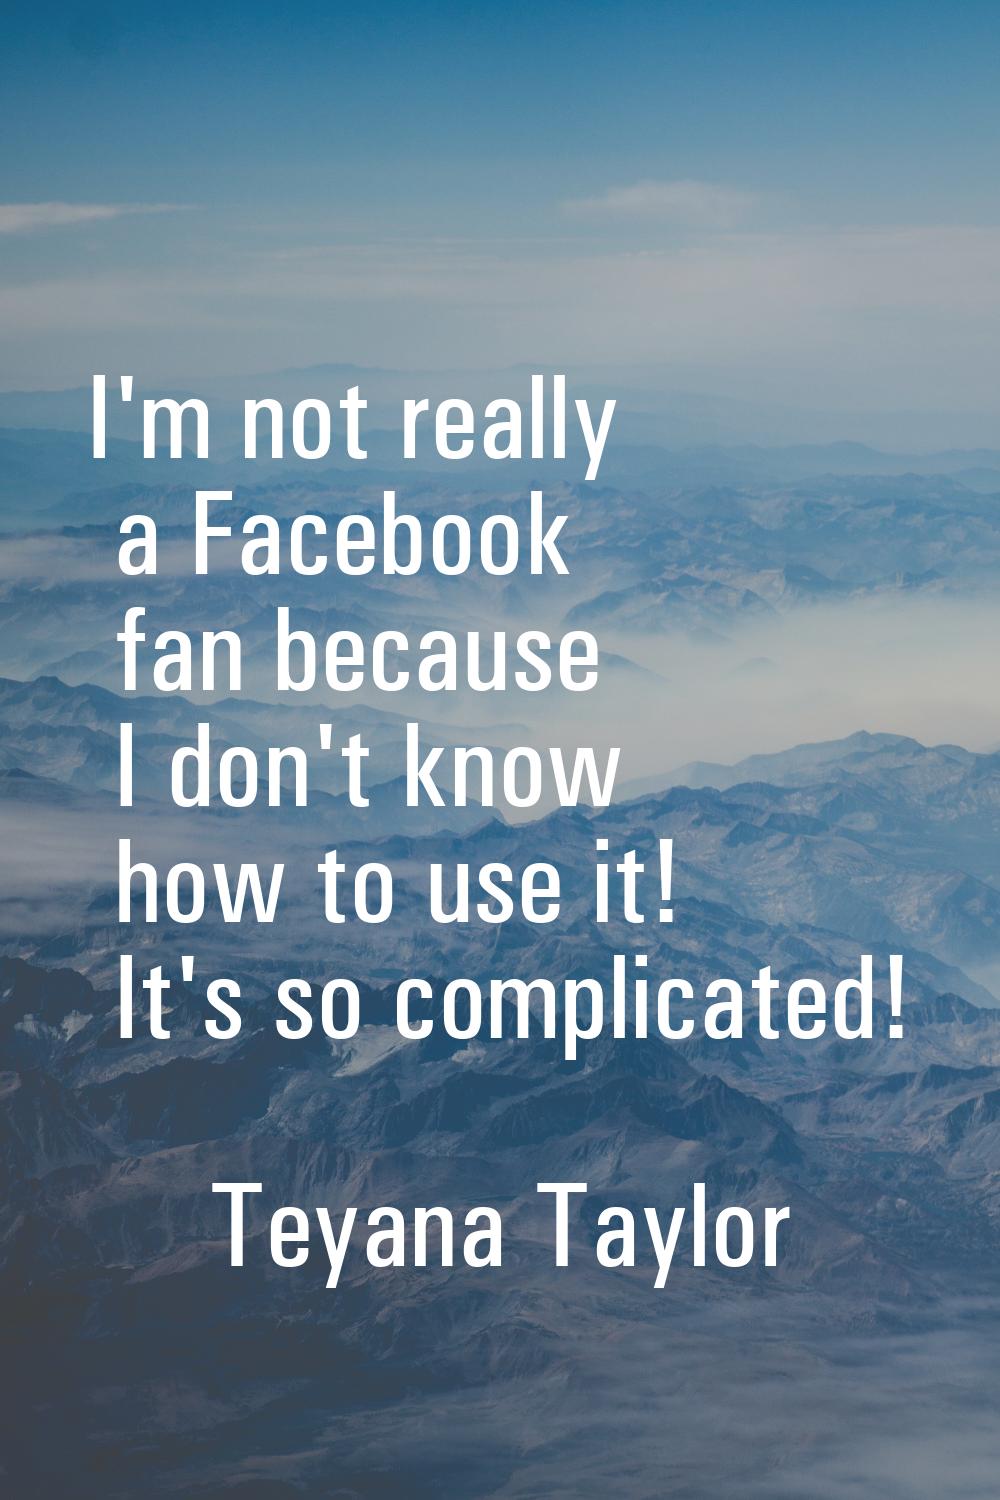 I'm not really a Facebook fan because I don't know how to use it! It's so complicated!